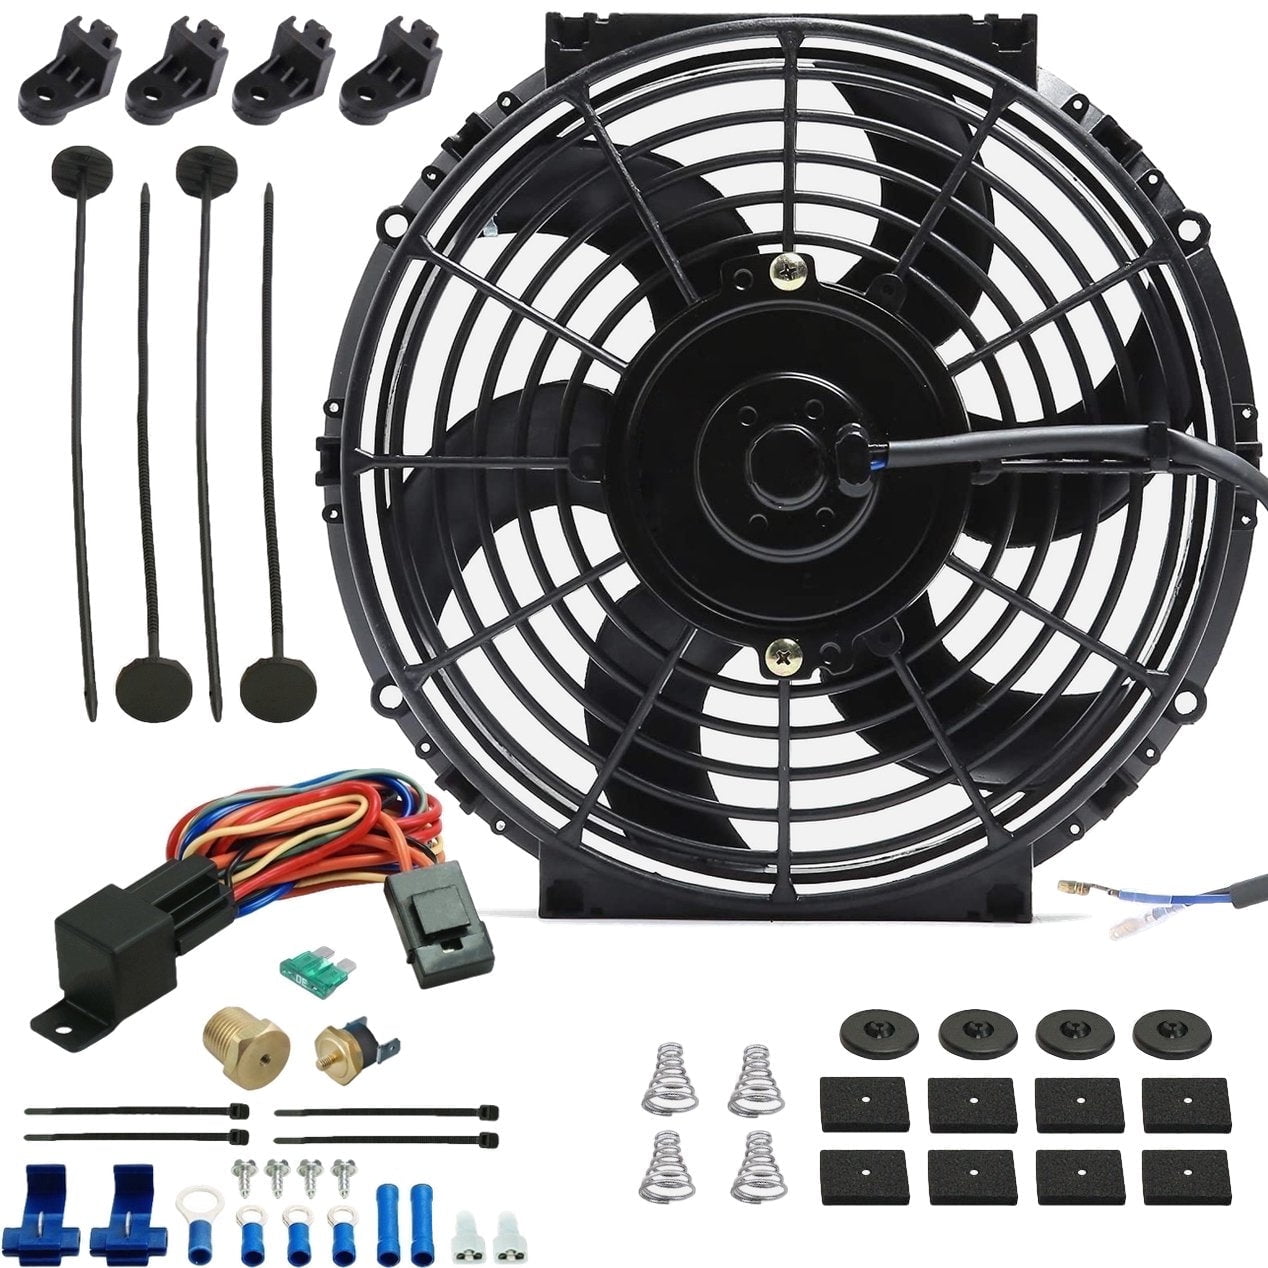 CarBole 14 inch 90W 12V Universal High Performance Electric Radiator Cooling Fan With Fan Mounting Wiring Harness Kit Black 